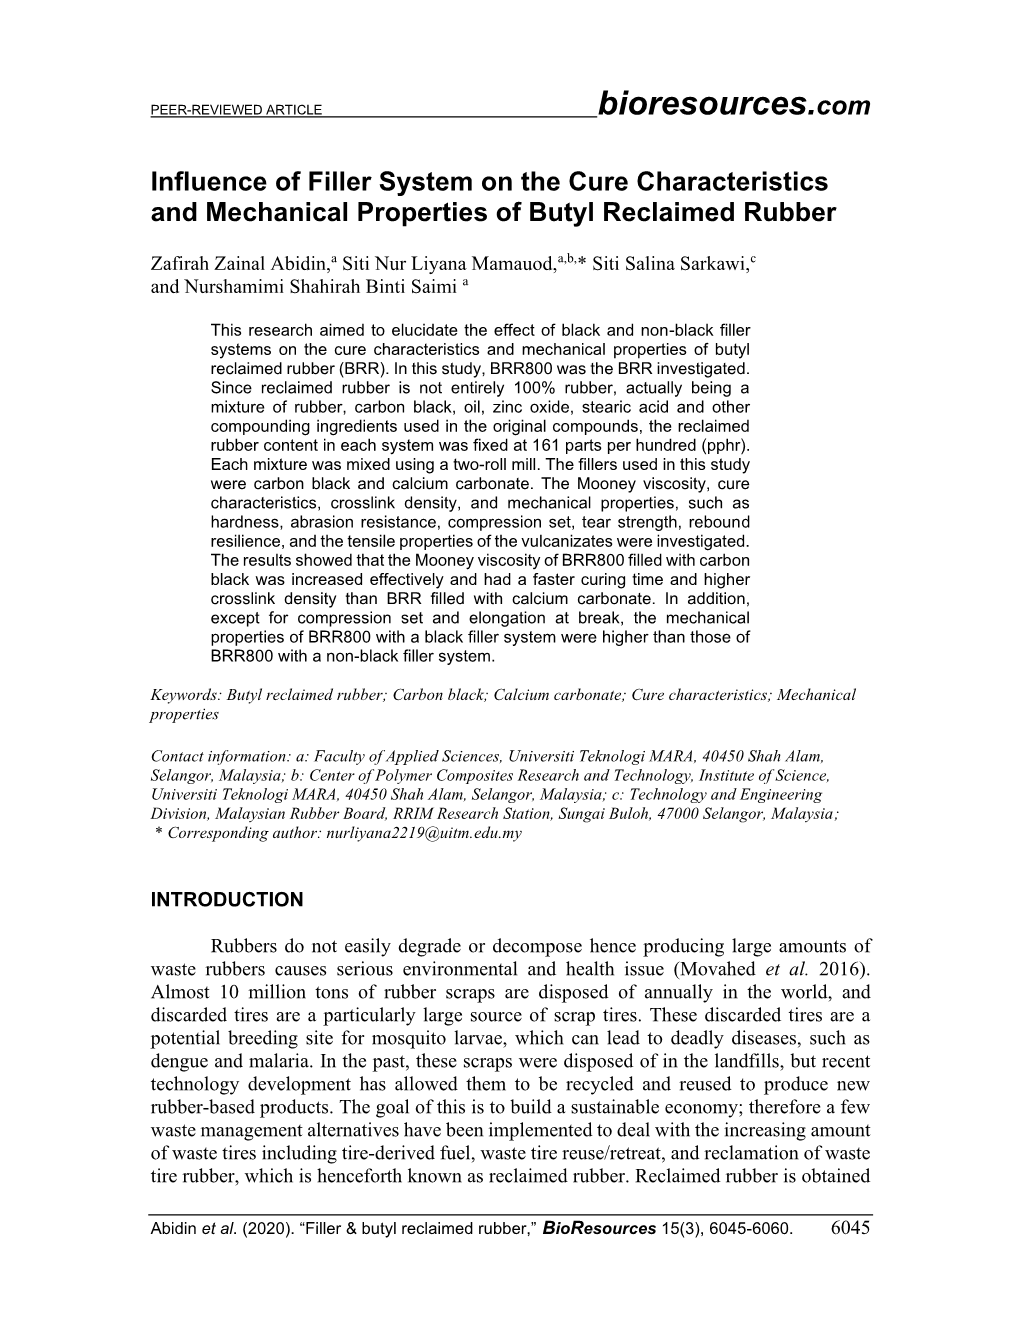 Influence of Filler System on the Cure Characteristics and Mechanical Properties of Butyl Reclaimed Rubber